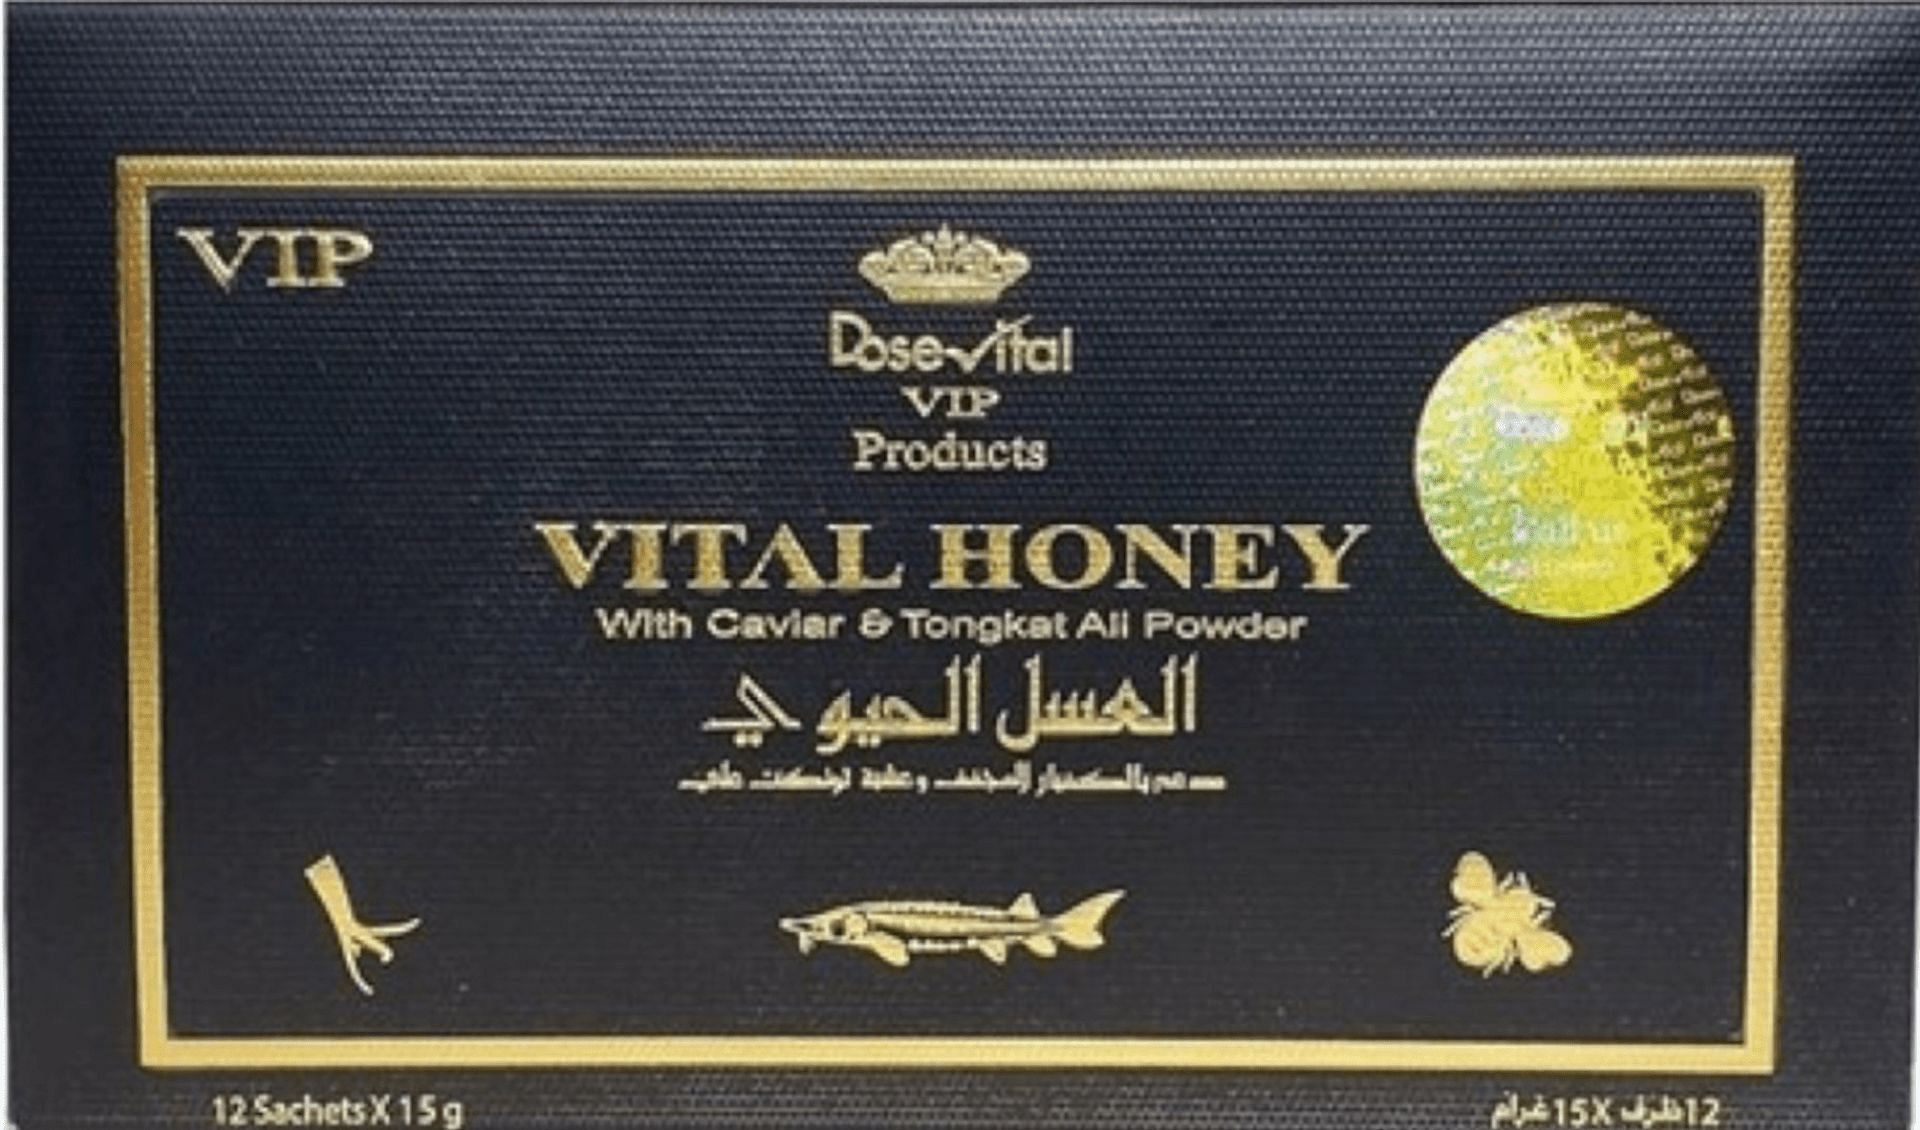 Honey product marketed by MKS Enterprise LLC under the scanner for having undisclosed ingredients. (Image via FDA)